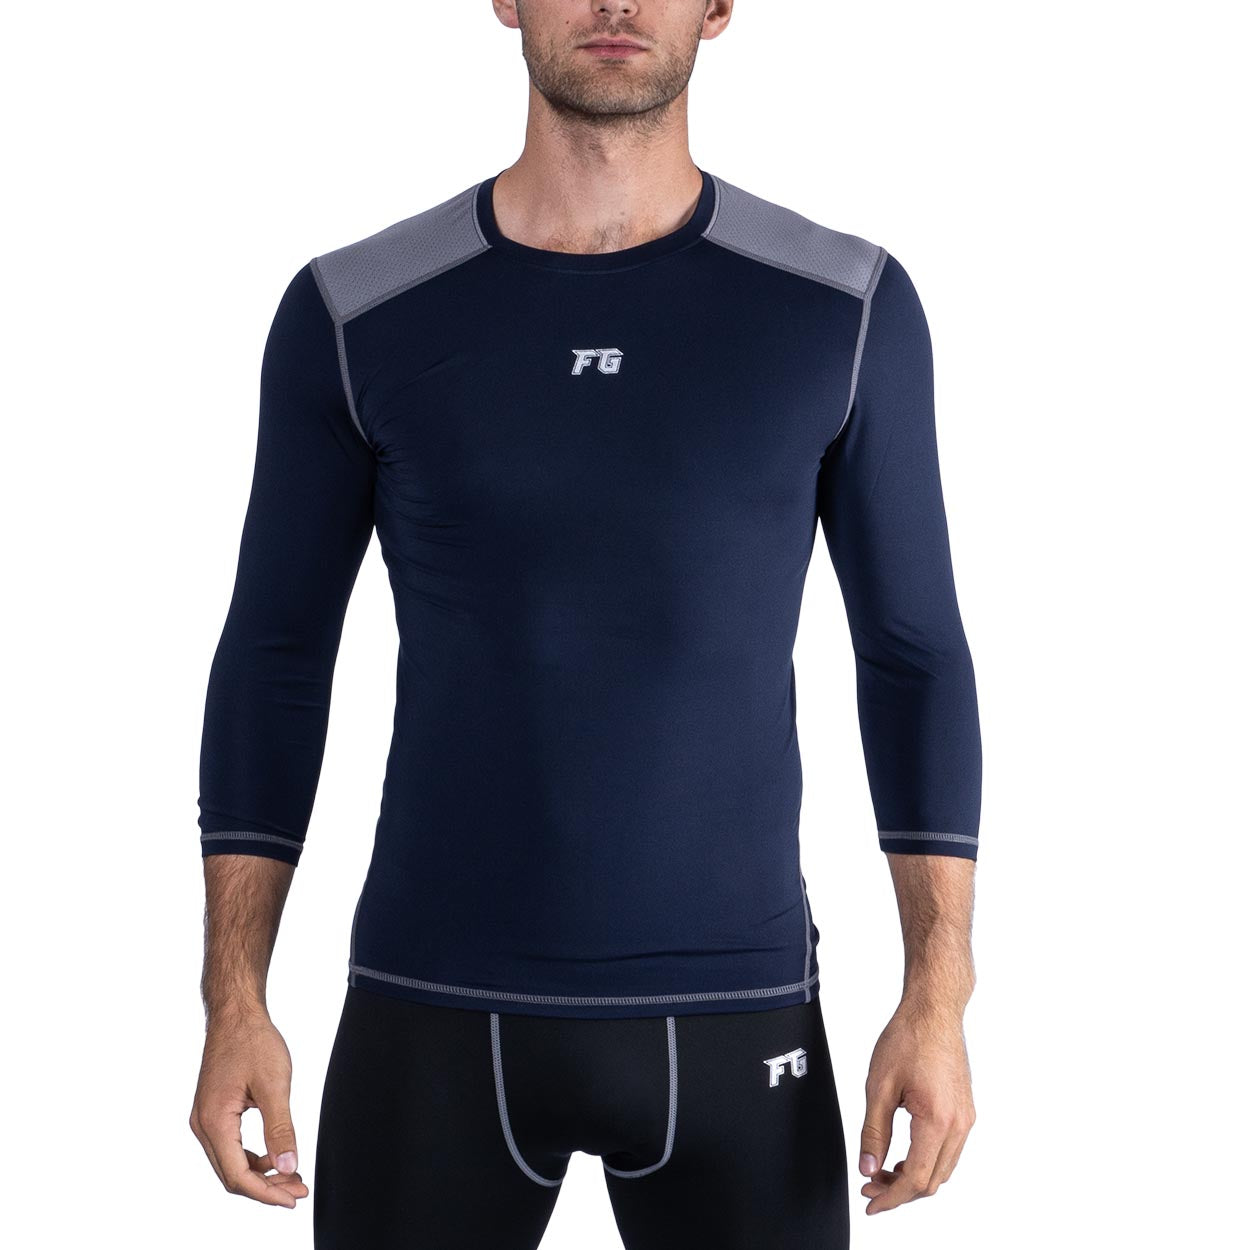 CombatX Summer 3/4 Compression Shirt - Youth - SPECIAL DEAL